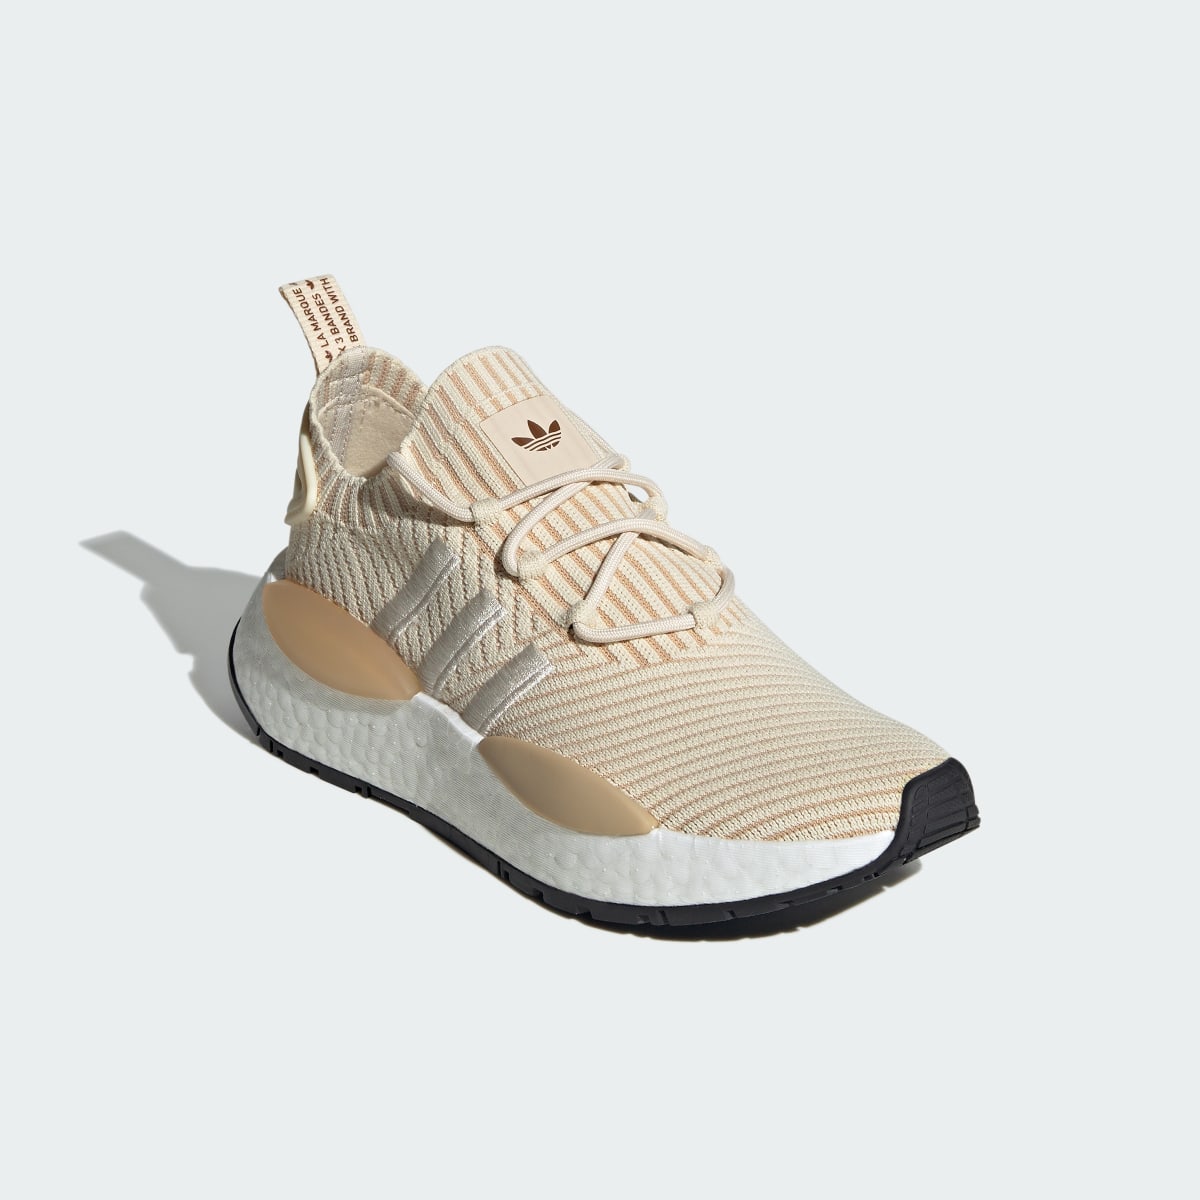 Adidas NMD_W1 Shoes. 5